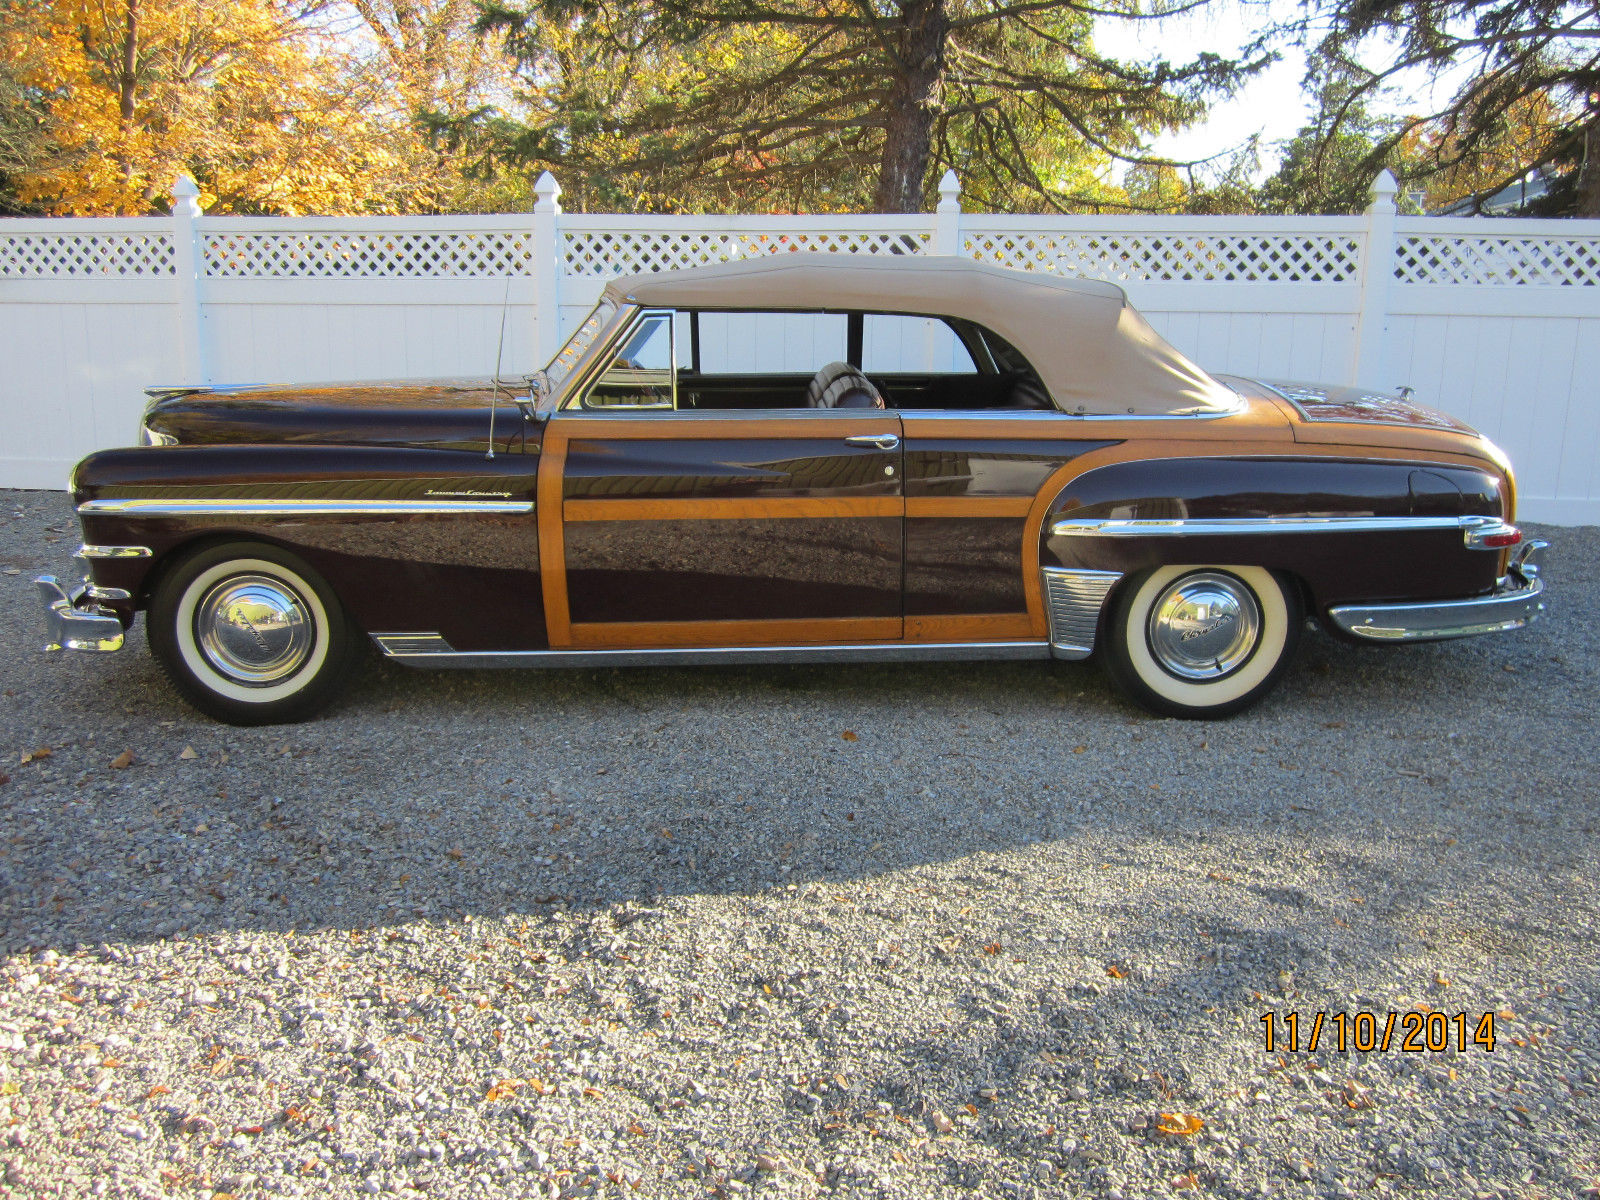 Chrysler t & c Convertible 1949 smclassiccars com  1949-chrysler-town-amp-country-convertible-5